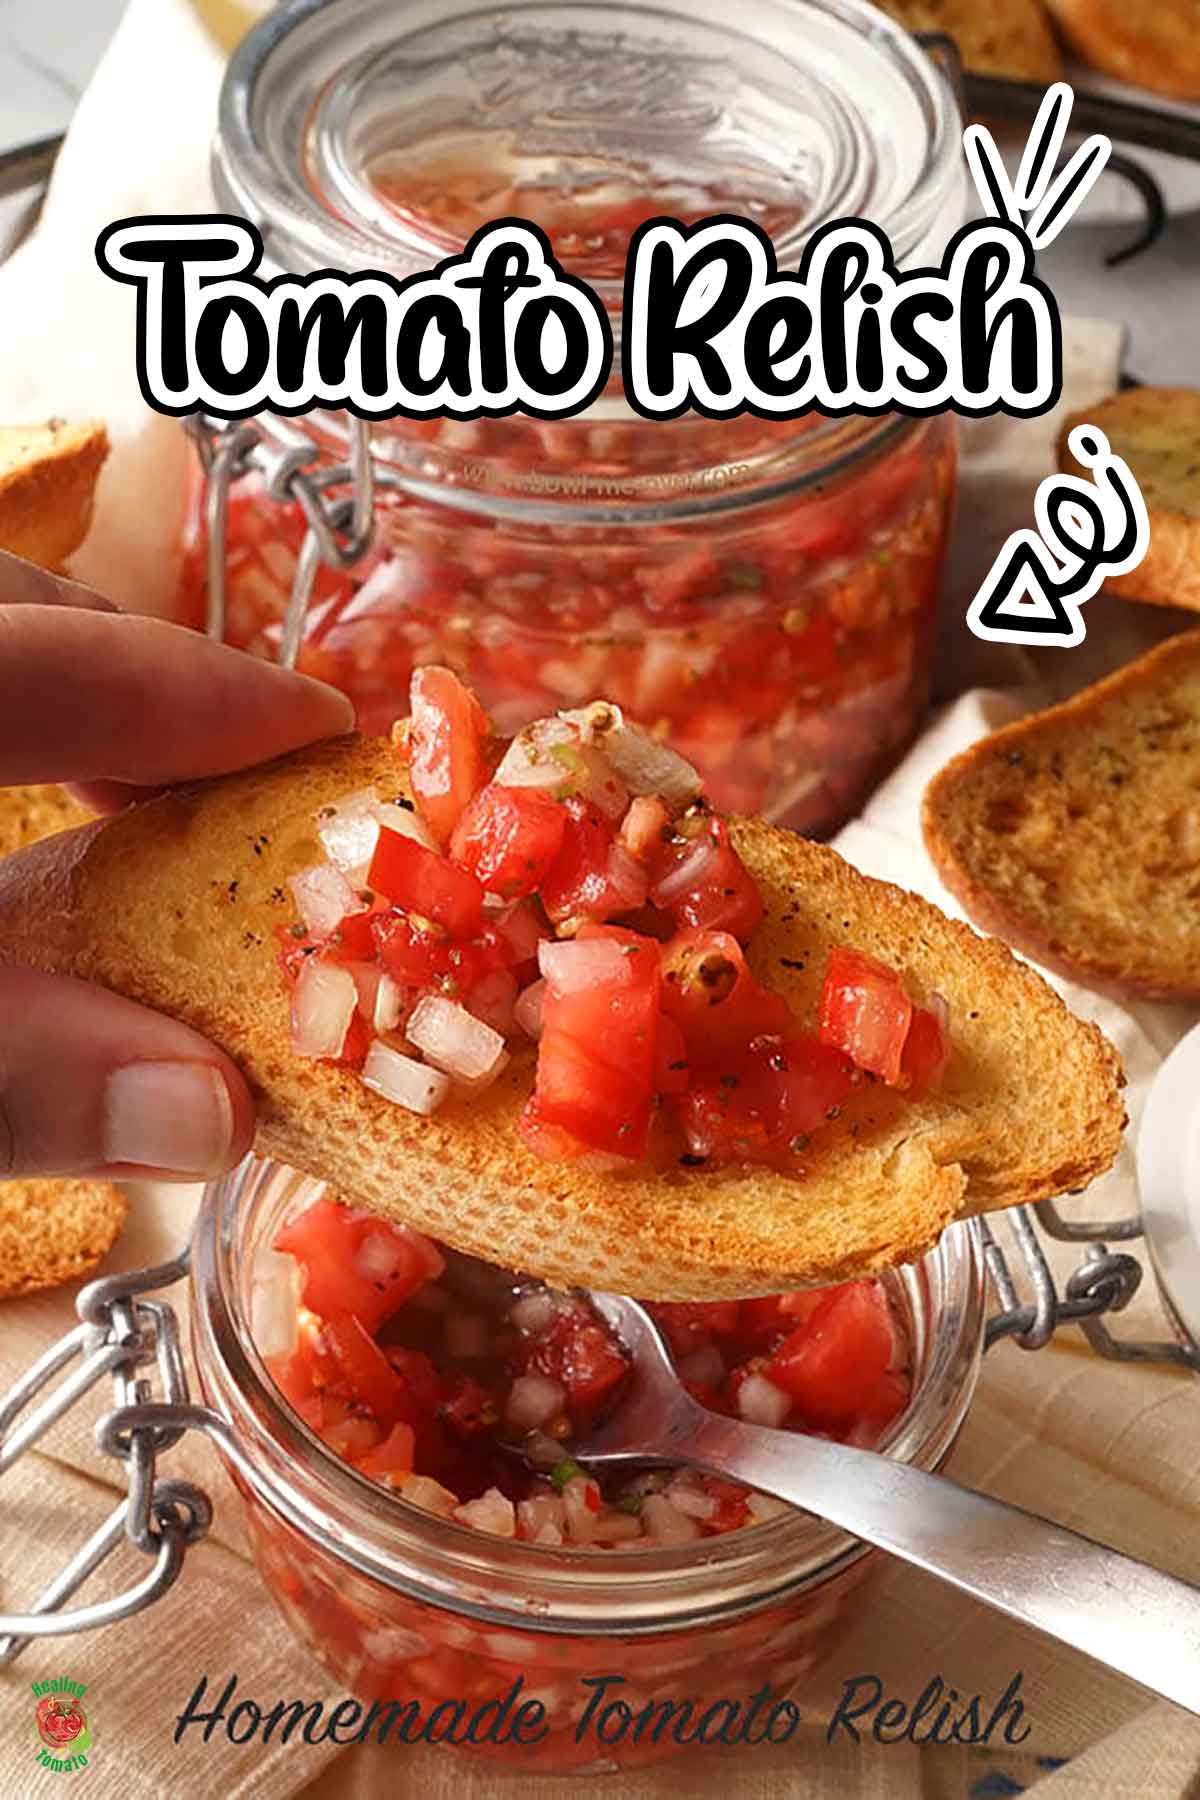 Top view of a piece of bread being held up by the author. Bread topped with tomato relish